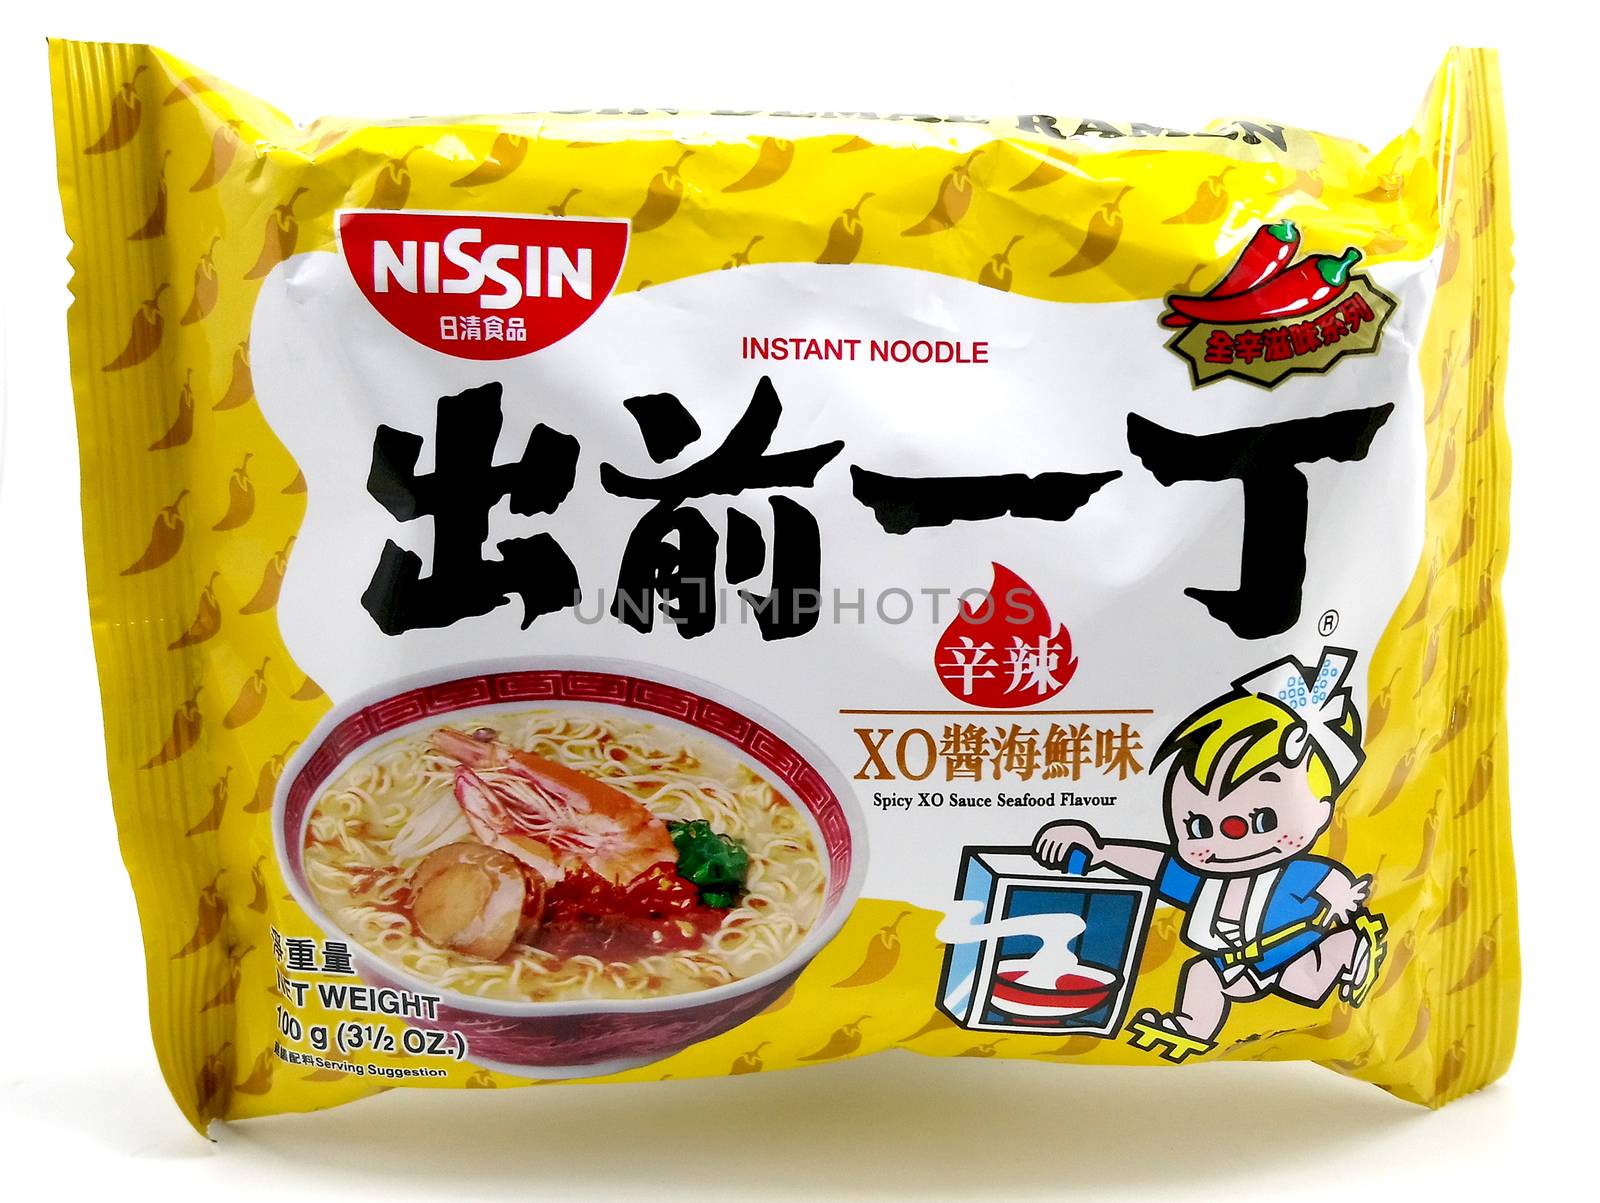 Nissin xo sauce seafood flavor noodles in Manila, Philippines by imwaltersy